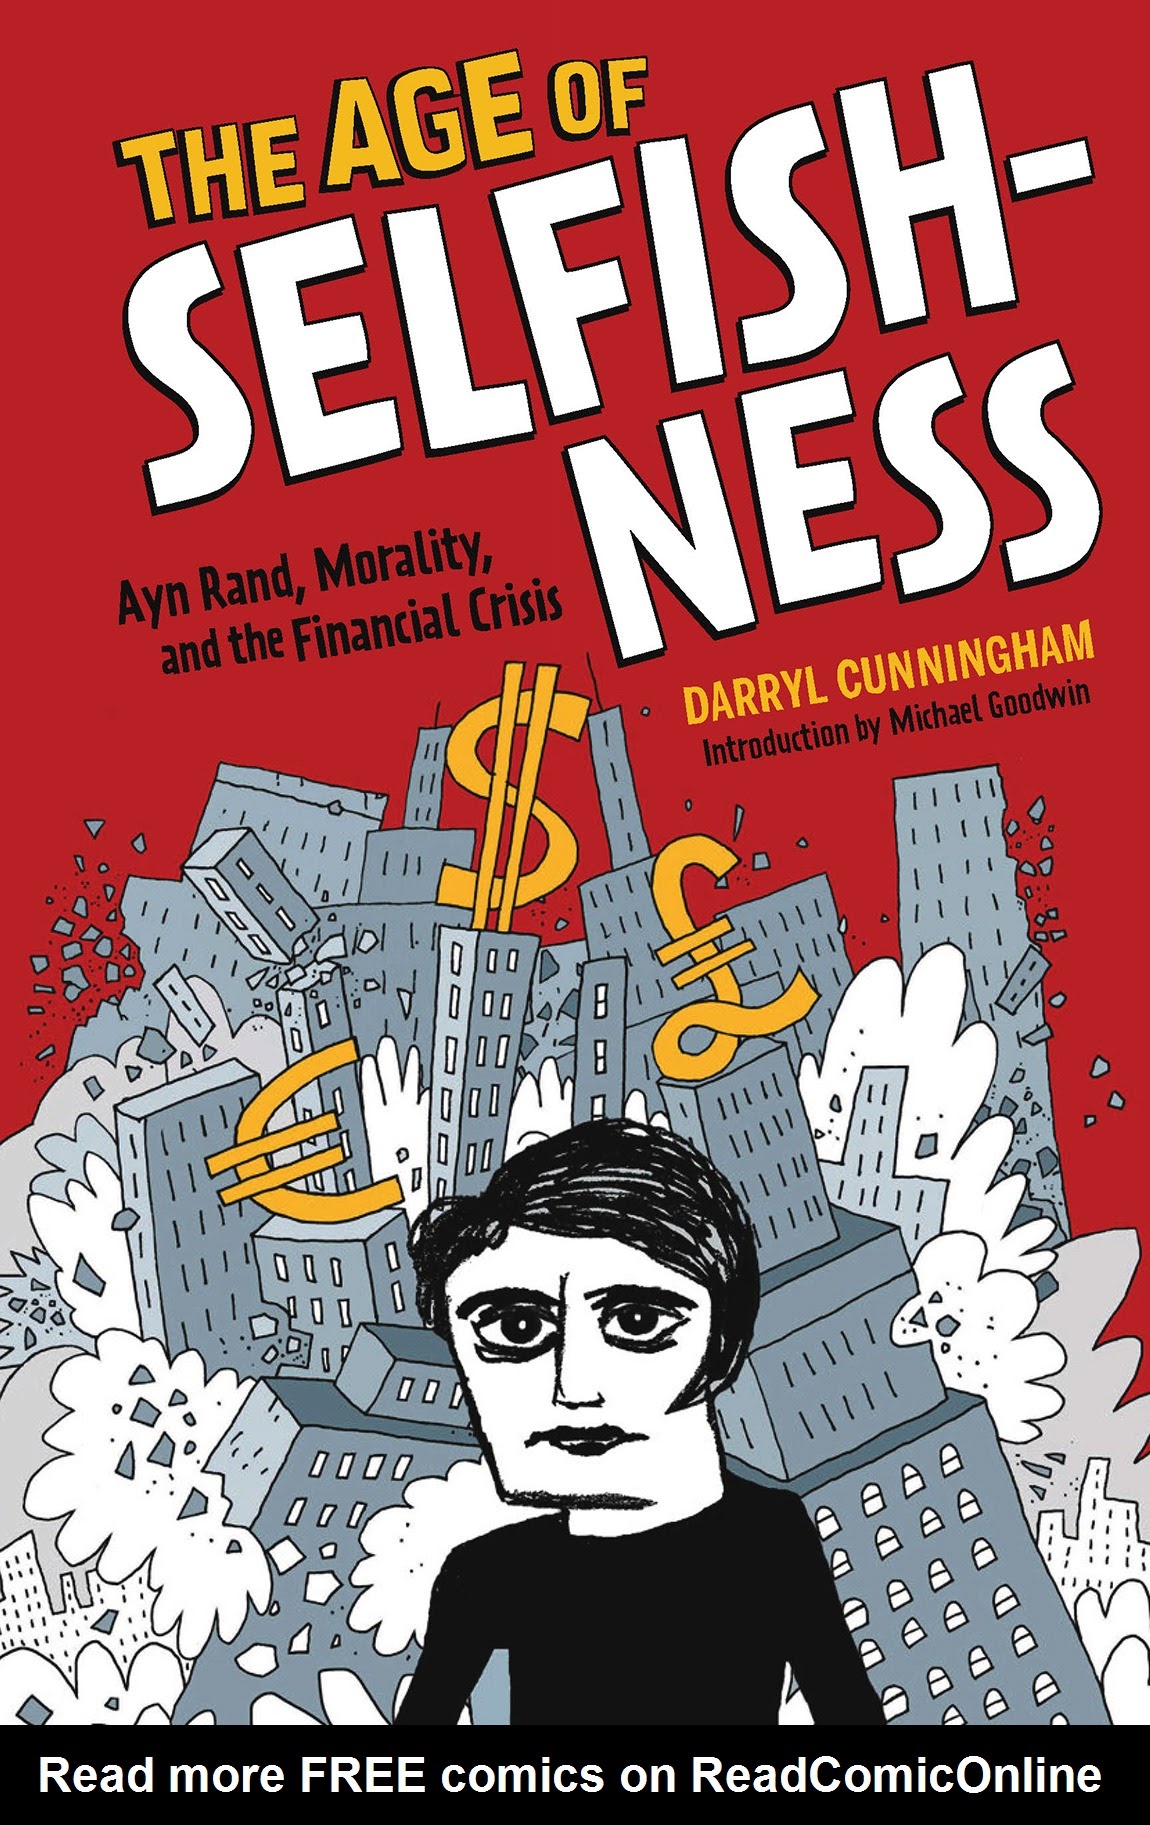 Read online The Age of Selfishness: Ayn Rand, Morality, and the Financial Crisis comic -  Issue # TPB (Part 1) - 1